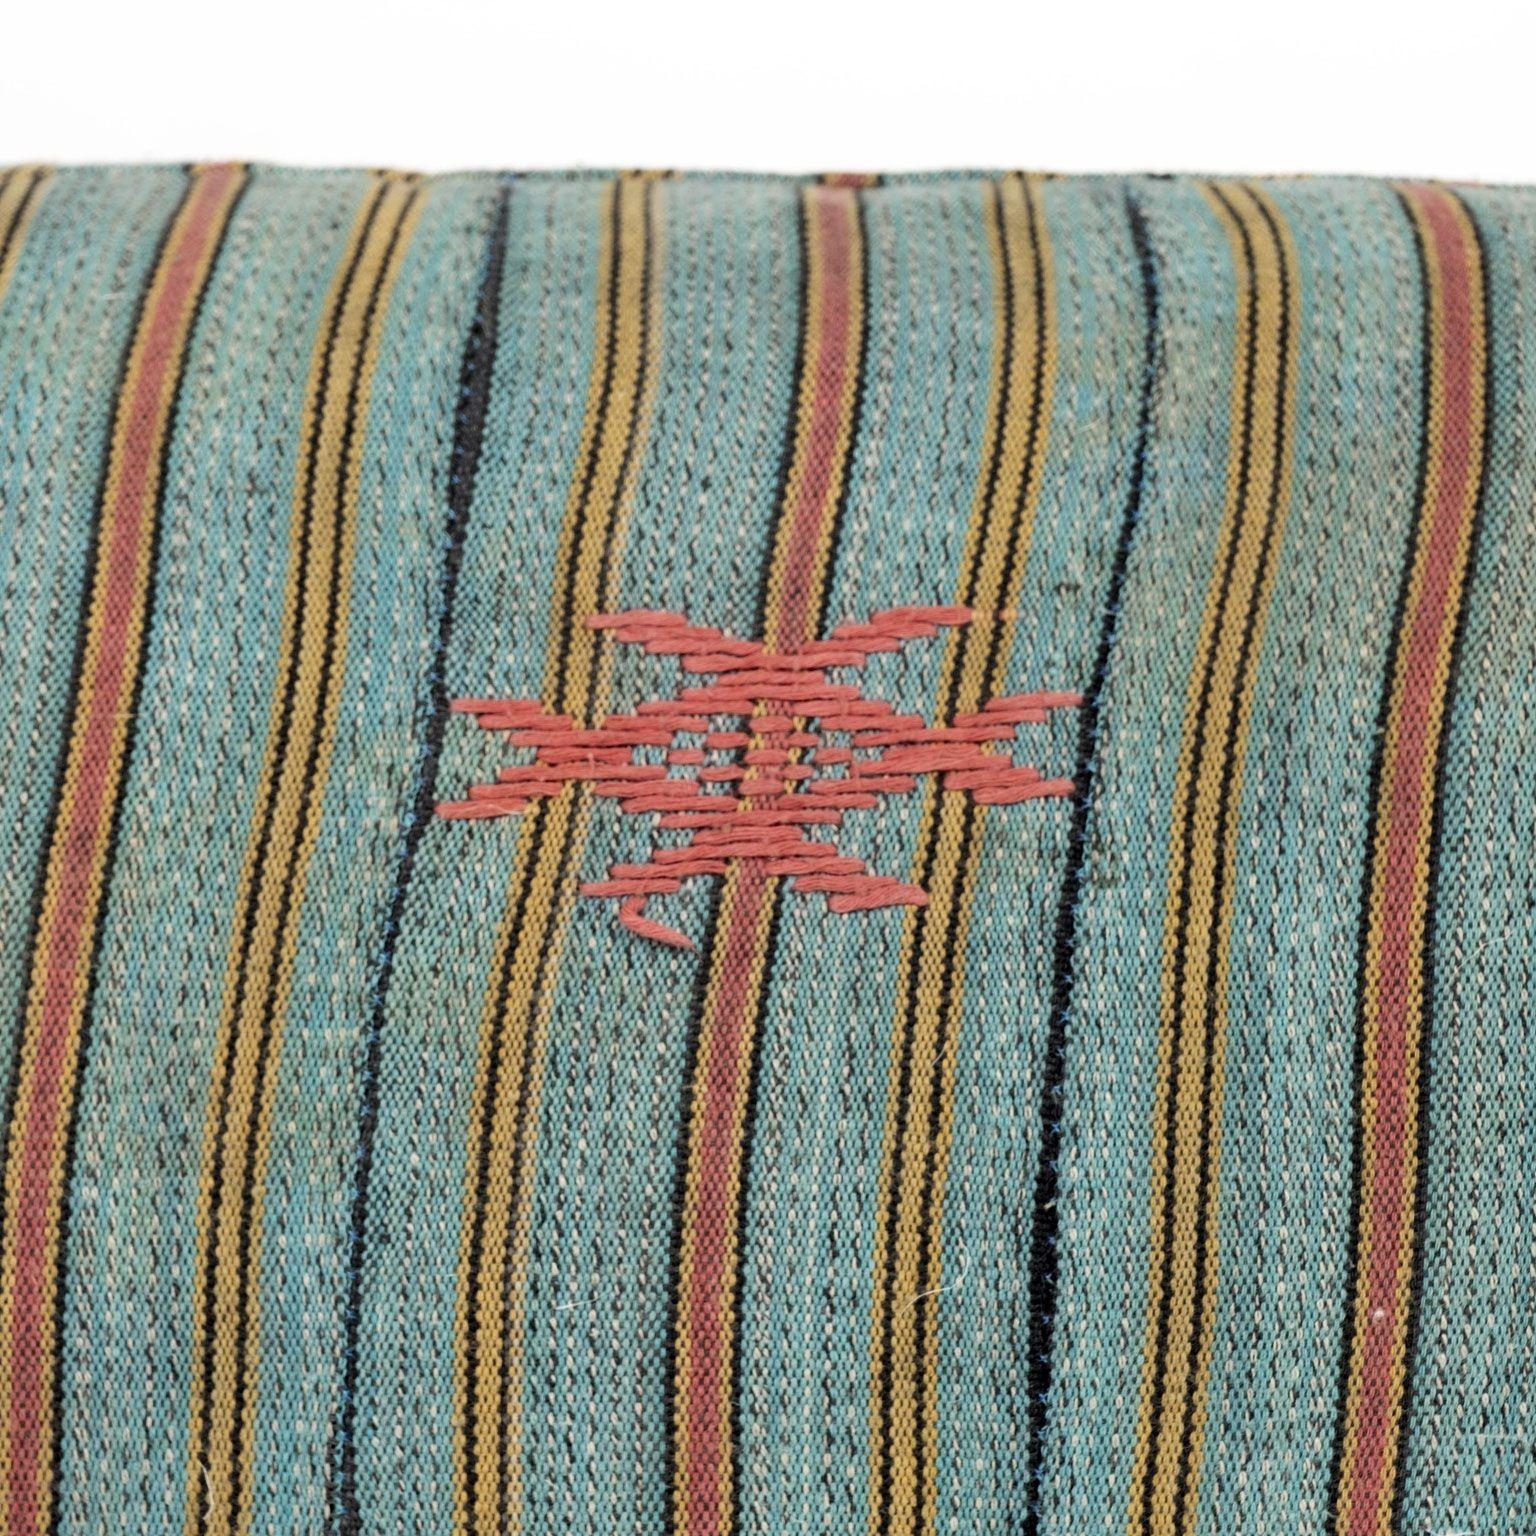 Large teal, gold, navy and coral striped print lumbar cushion hand-sewn from a vintage cotton textile with embroidered decoration. This decorative pillow is self-backed and includes a zip fastener and feather insert. Two available. Sold separately